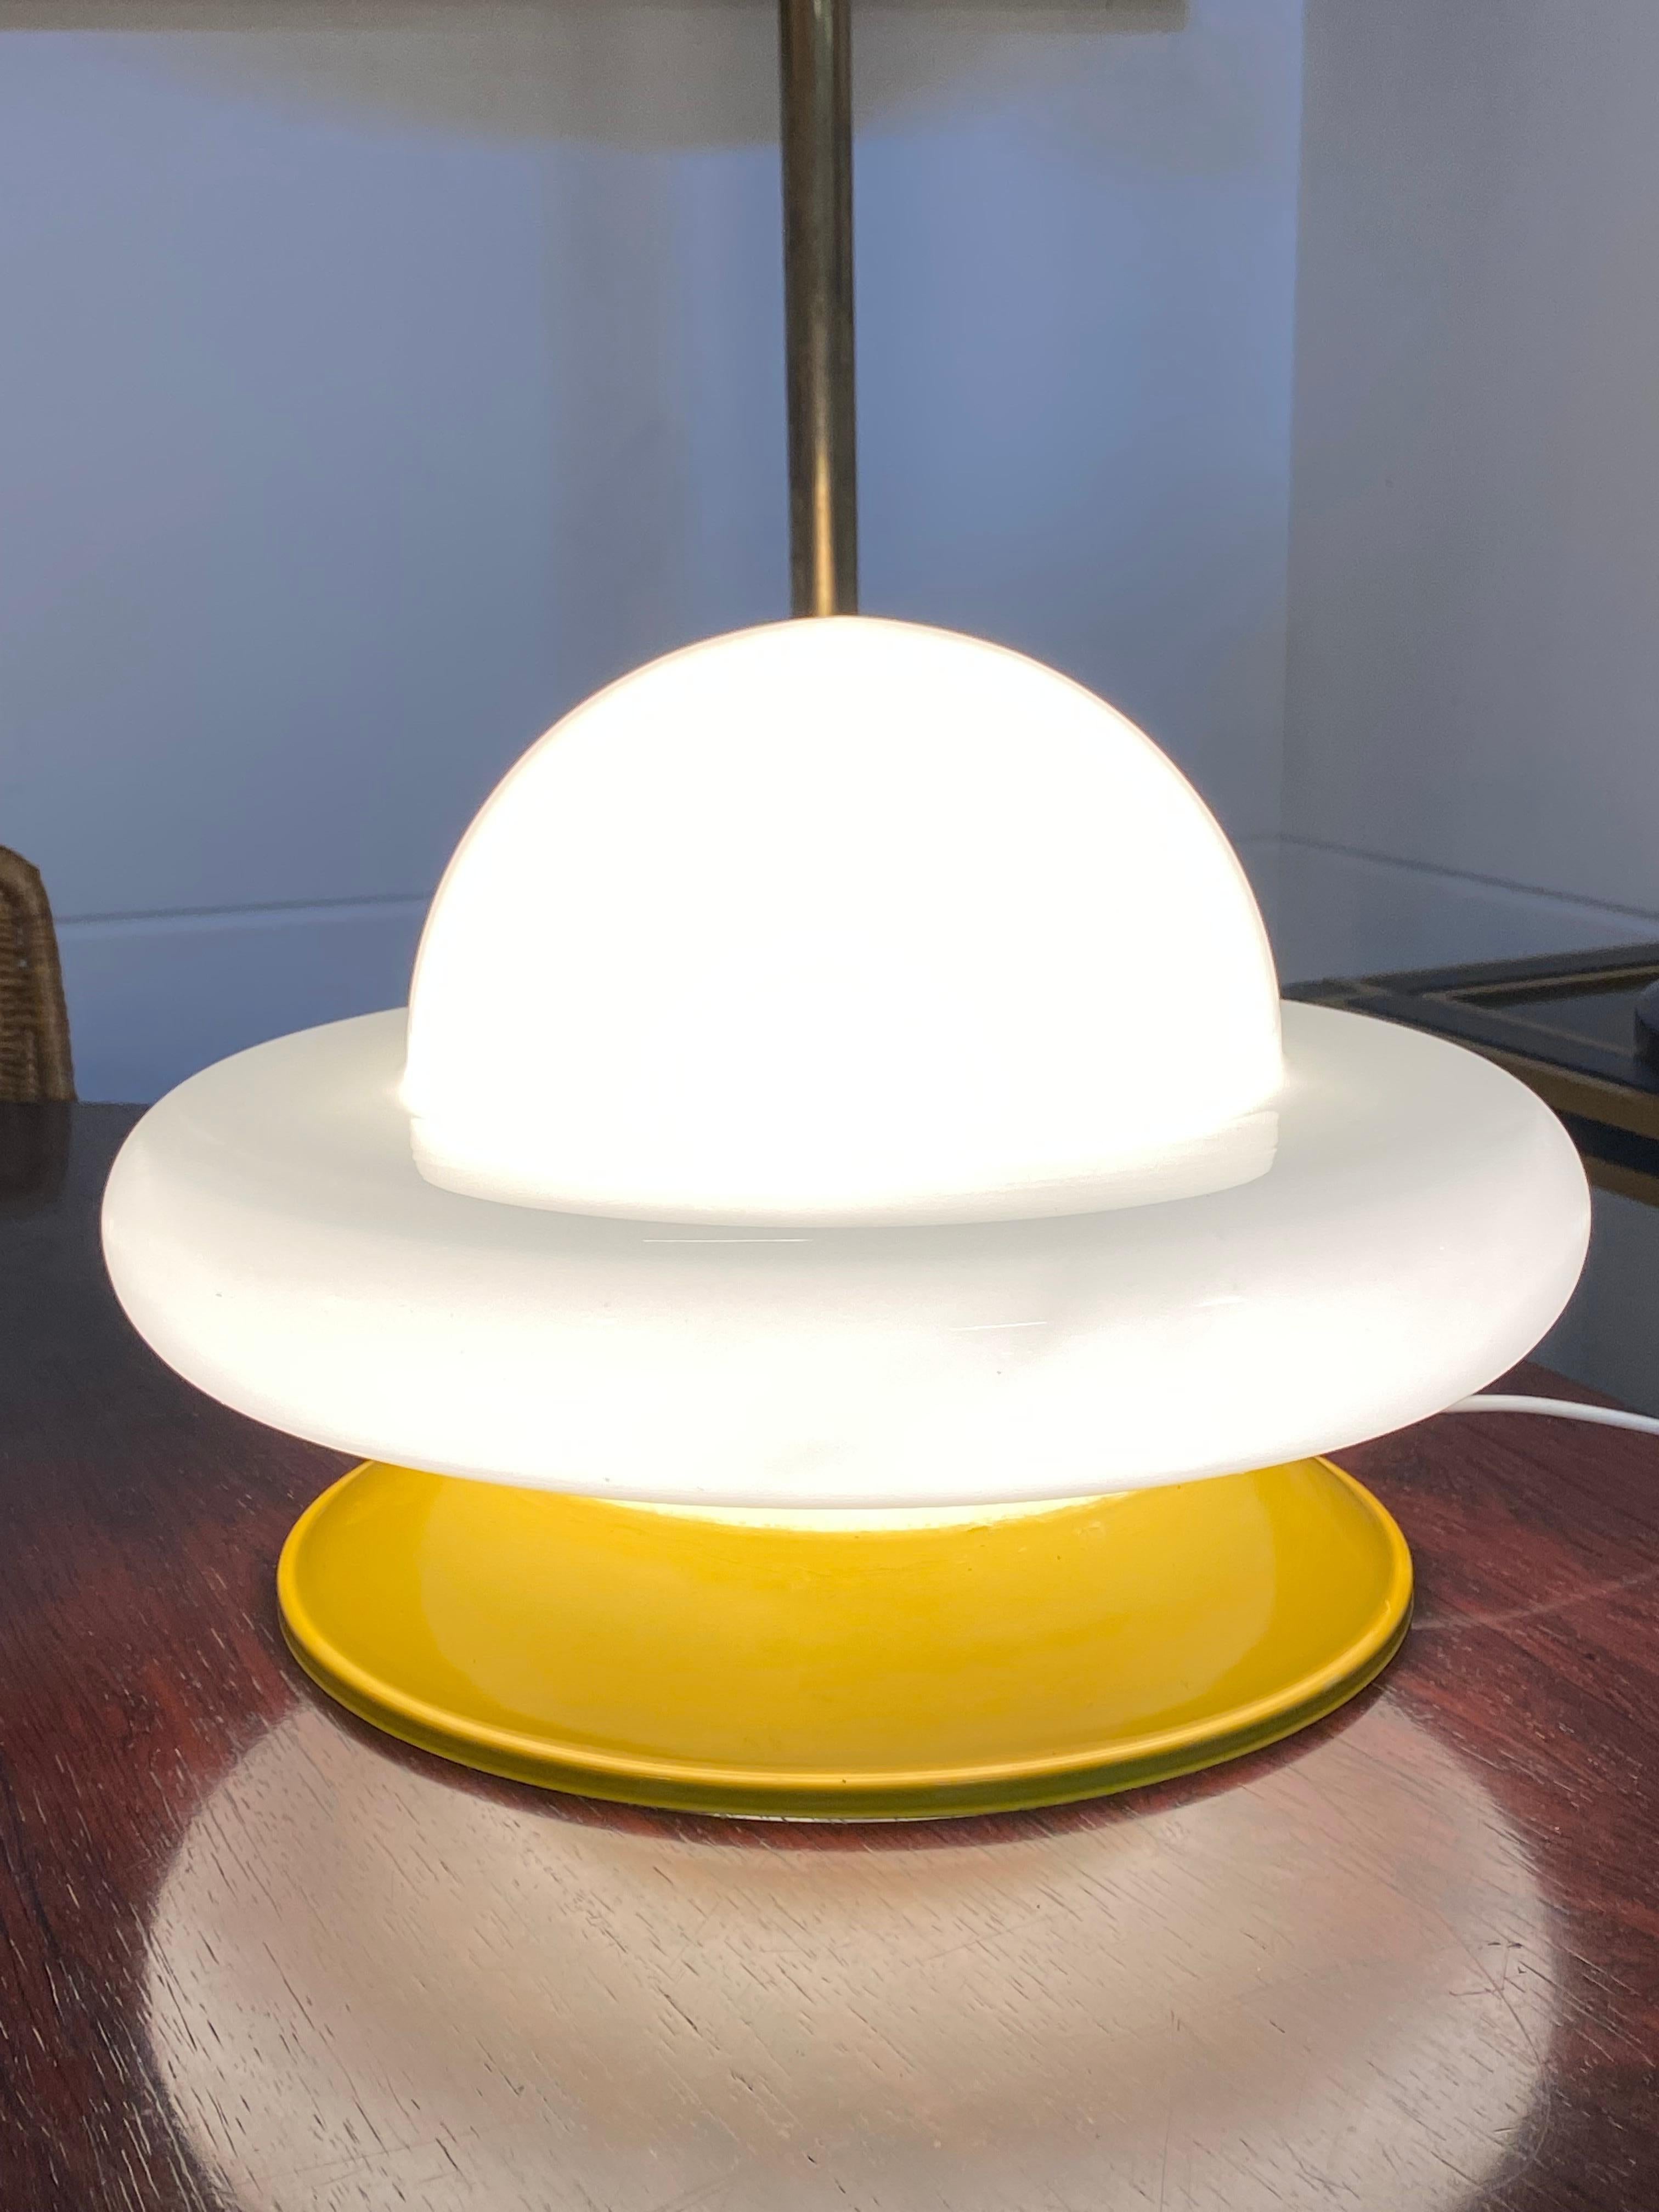 A round base in orange painted metal, a slim chrome stand and a semi-circular shade in opaline glass form this Space Age table lamp. The on/off button is located along the wire.